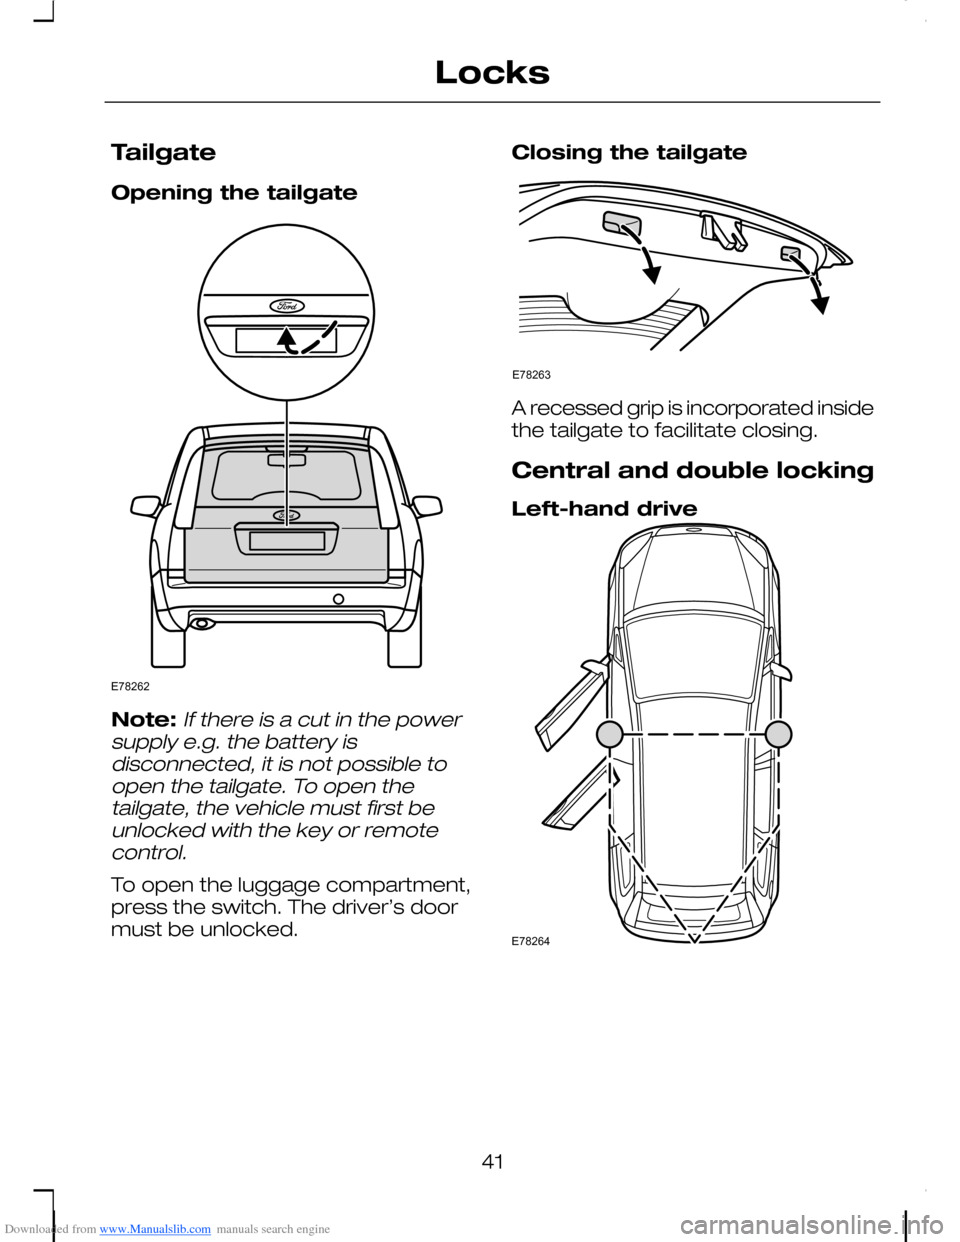 FORD C MAX 2008 1.G Owners Manual Downloaded from www.Manualslib.com manuals search engine Tailgate
Opening the tailgate
Note:If there is a cut in the powersupply e.g. the battery isdisconnected, it is not possible toopen the tailgate